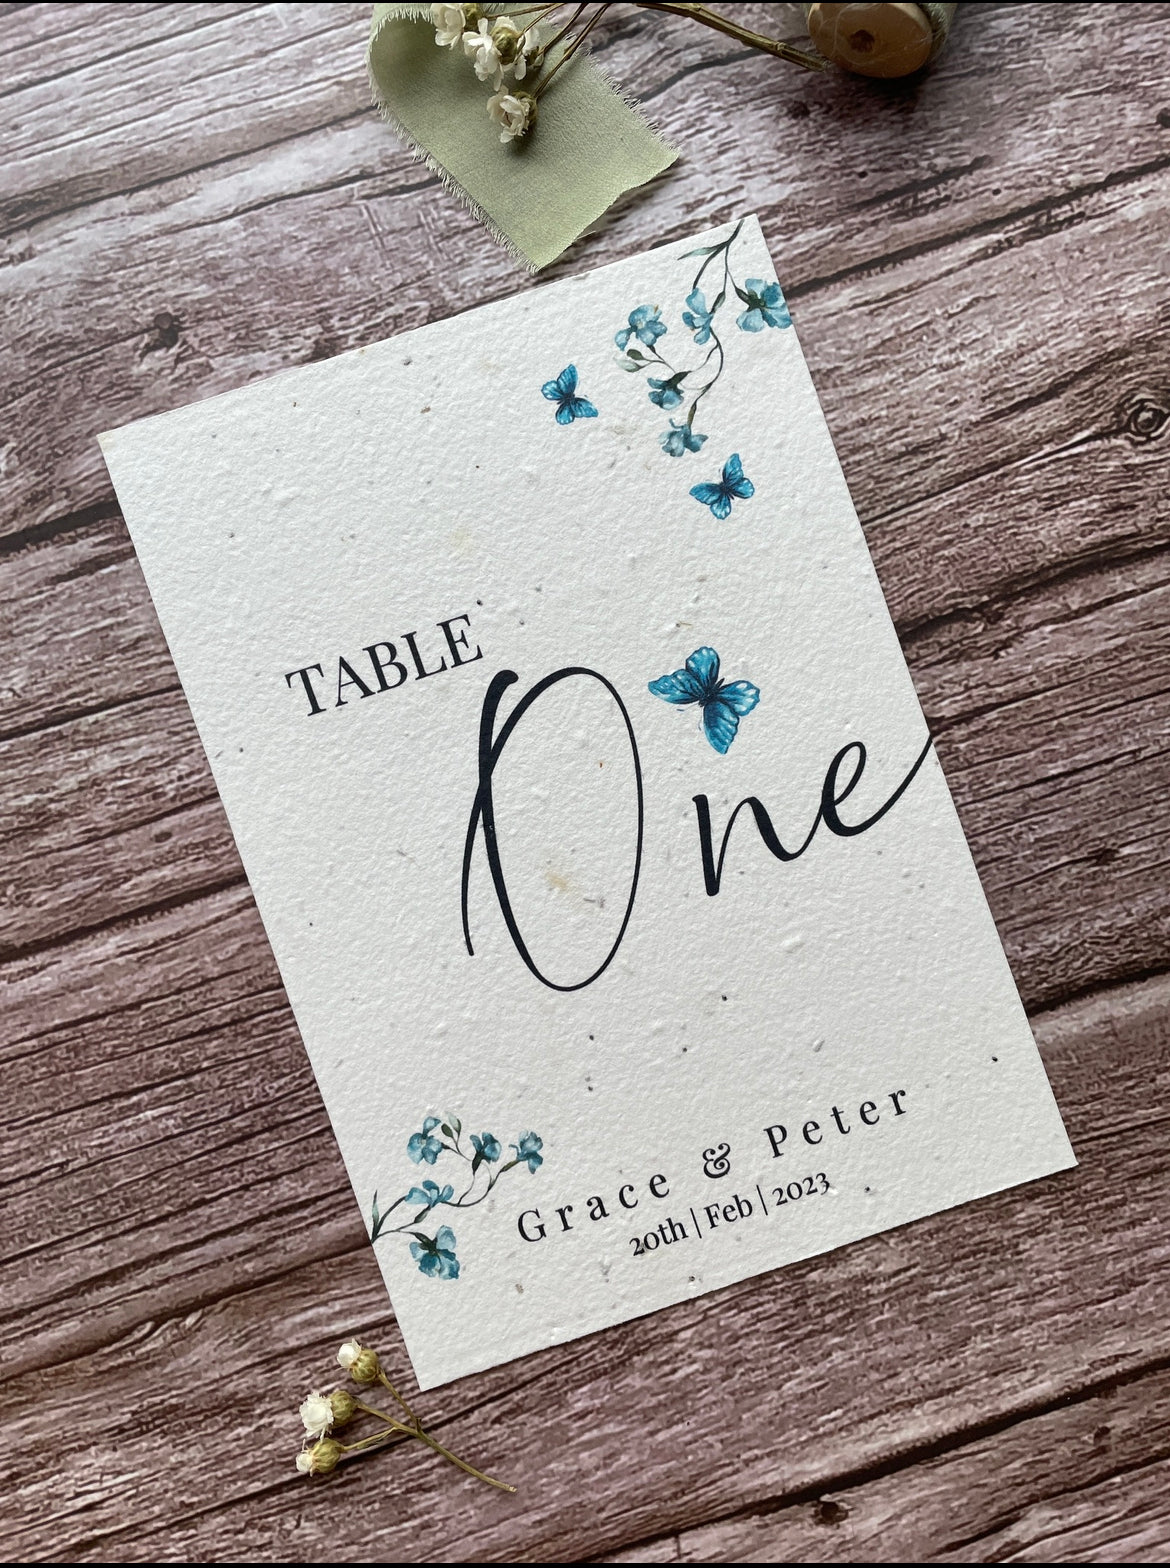 Plantable Wedding Table Number or Name Cards - Dusty Blue